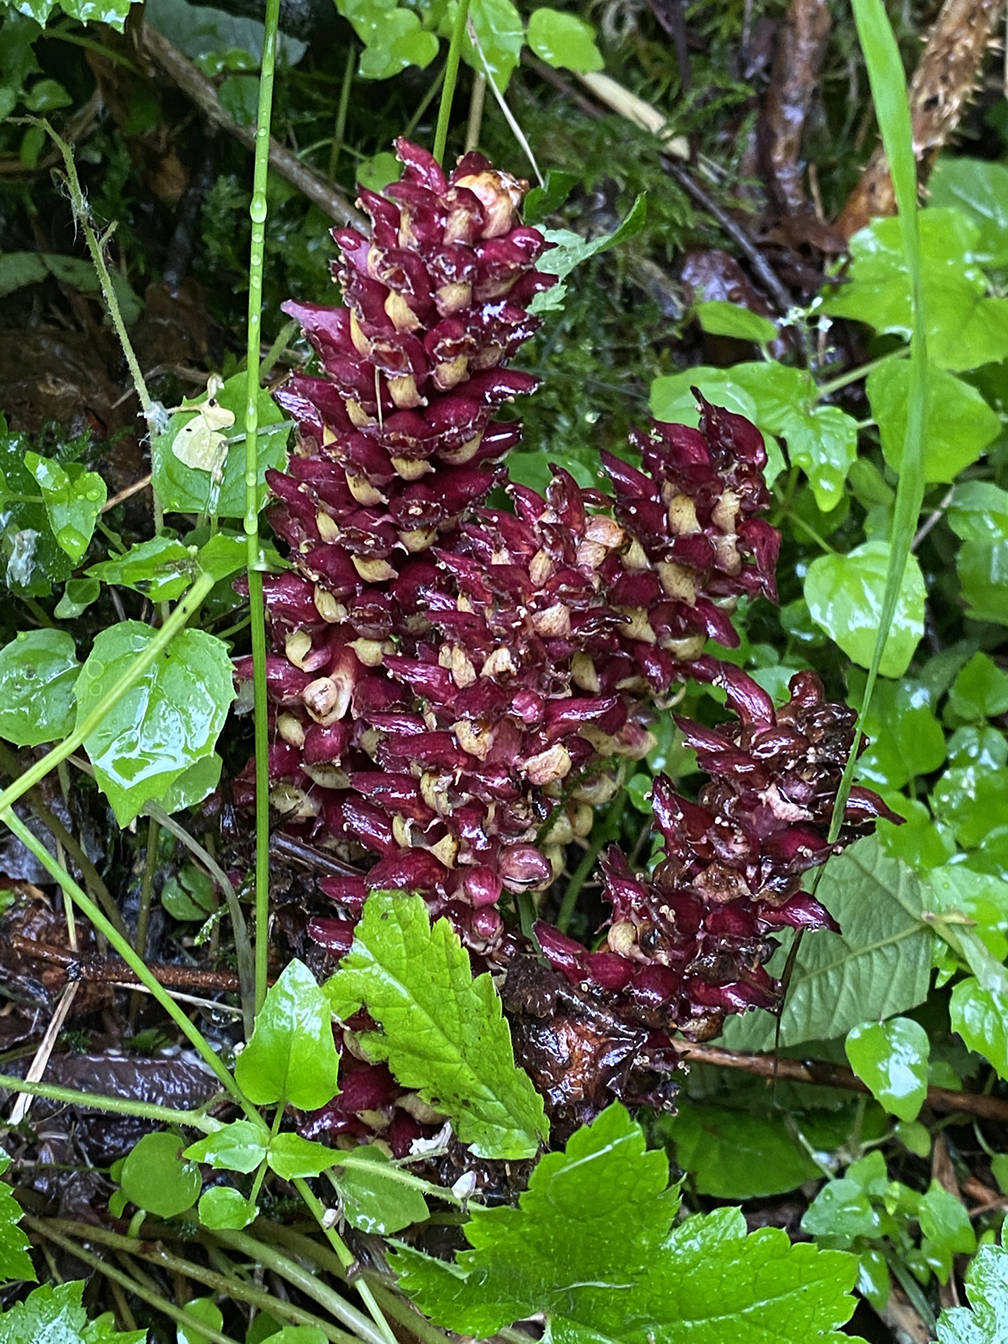 Ground cones were among the sights seen during a July 25 hike along Perseverance Trail. (Courtesy Photo / Deana Barajas)